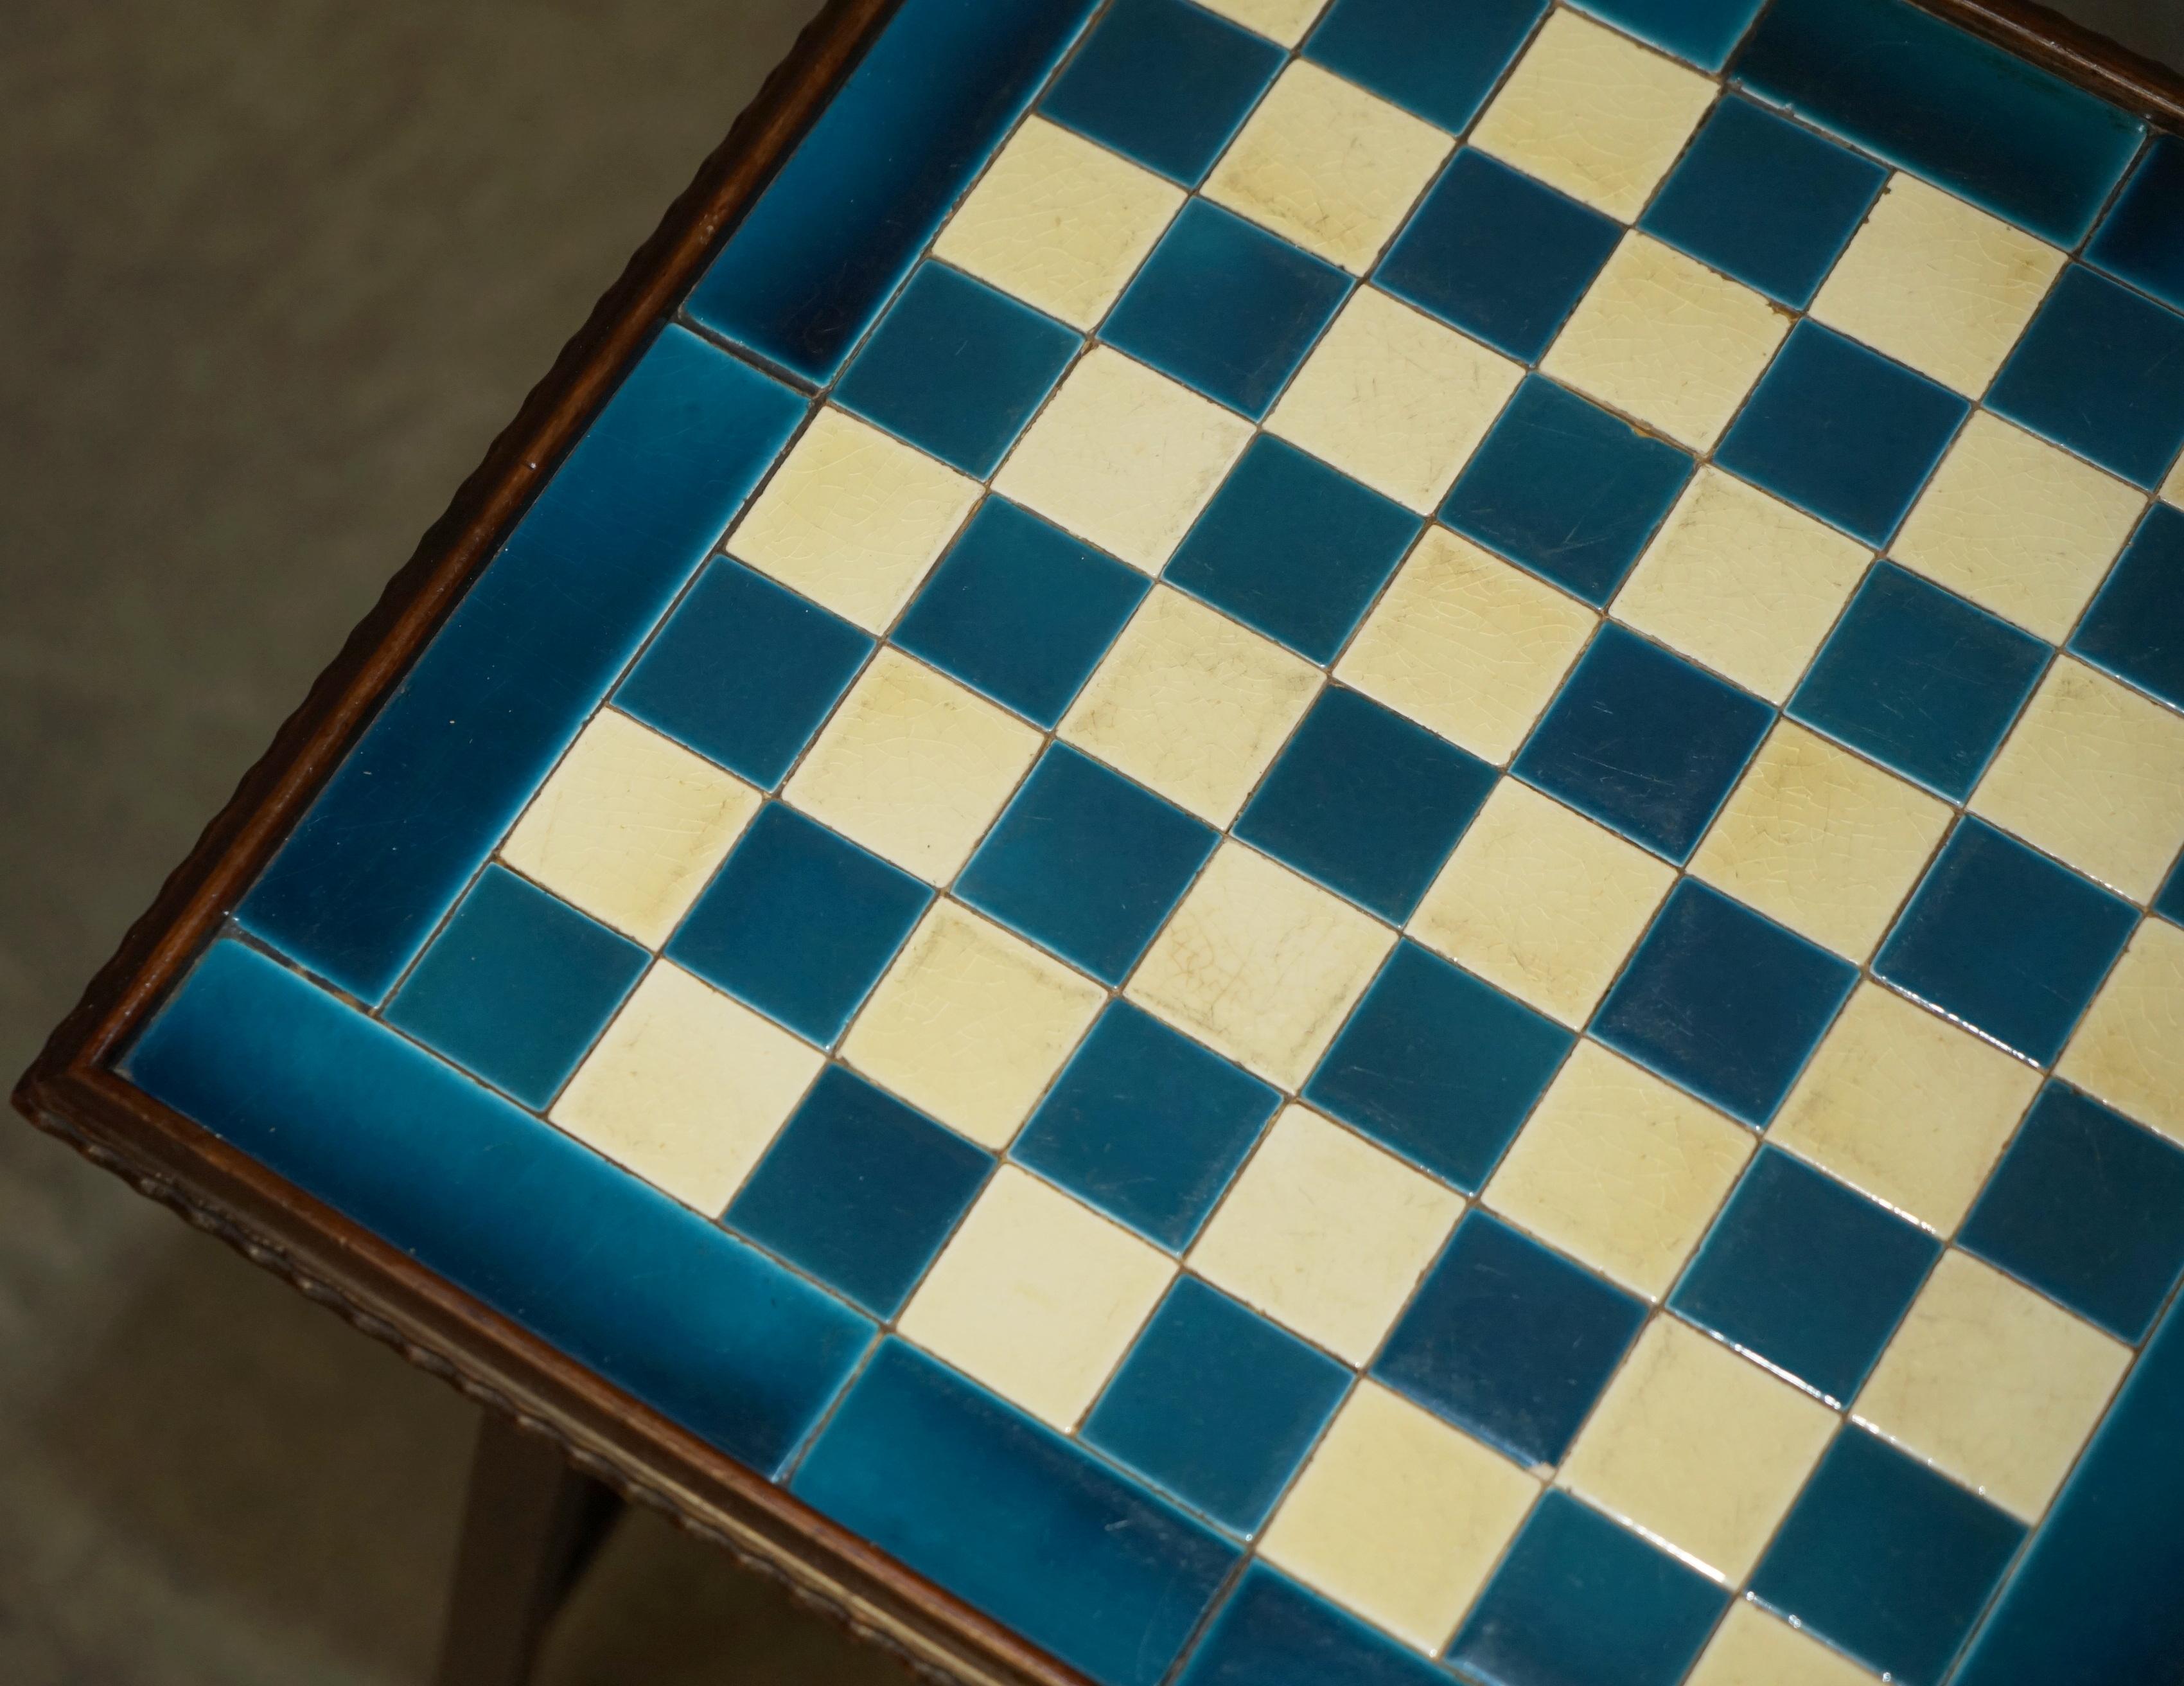 Hand-Crafted ANTIQUE VICTORIAN AESTHETIC MOVEMENT STYLE TiLED TOP CHESSBOARD CHESS TABLE For Sale